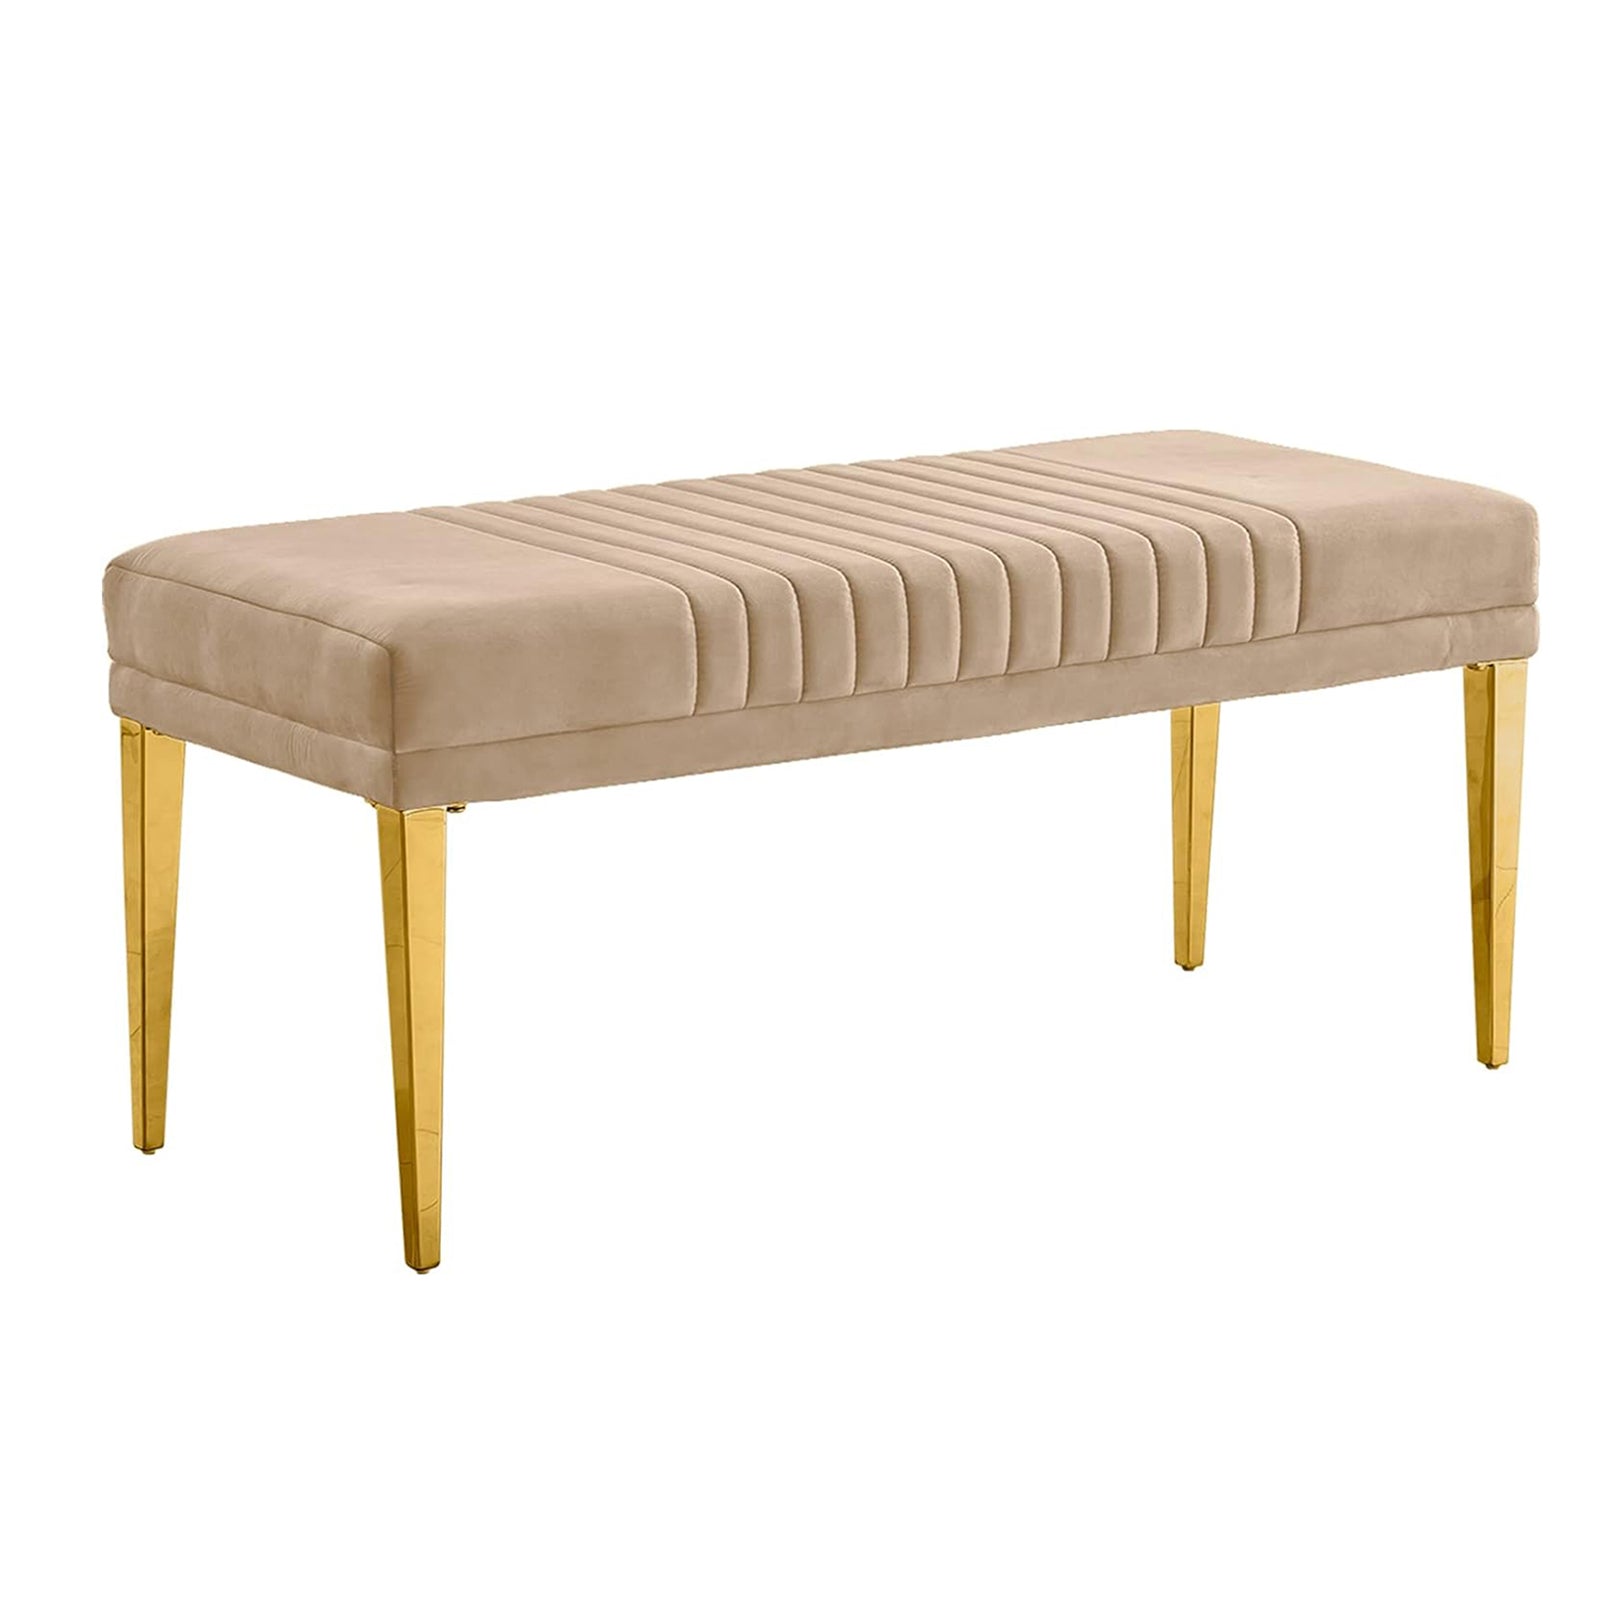 Enhance Your Dining Space with the AUZ Lovely Color Bench with Gold Stainless Steel Legs